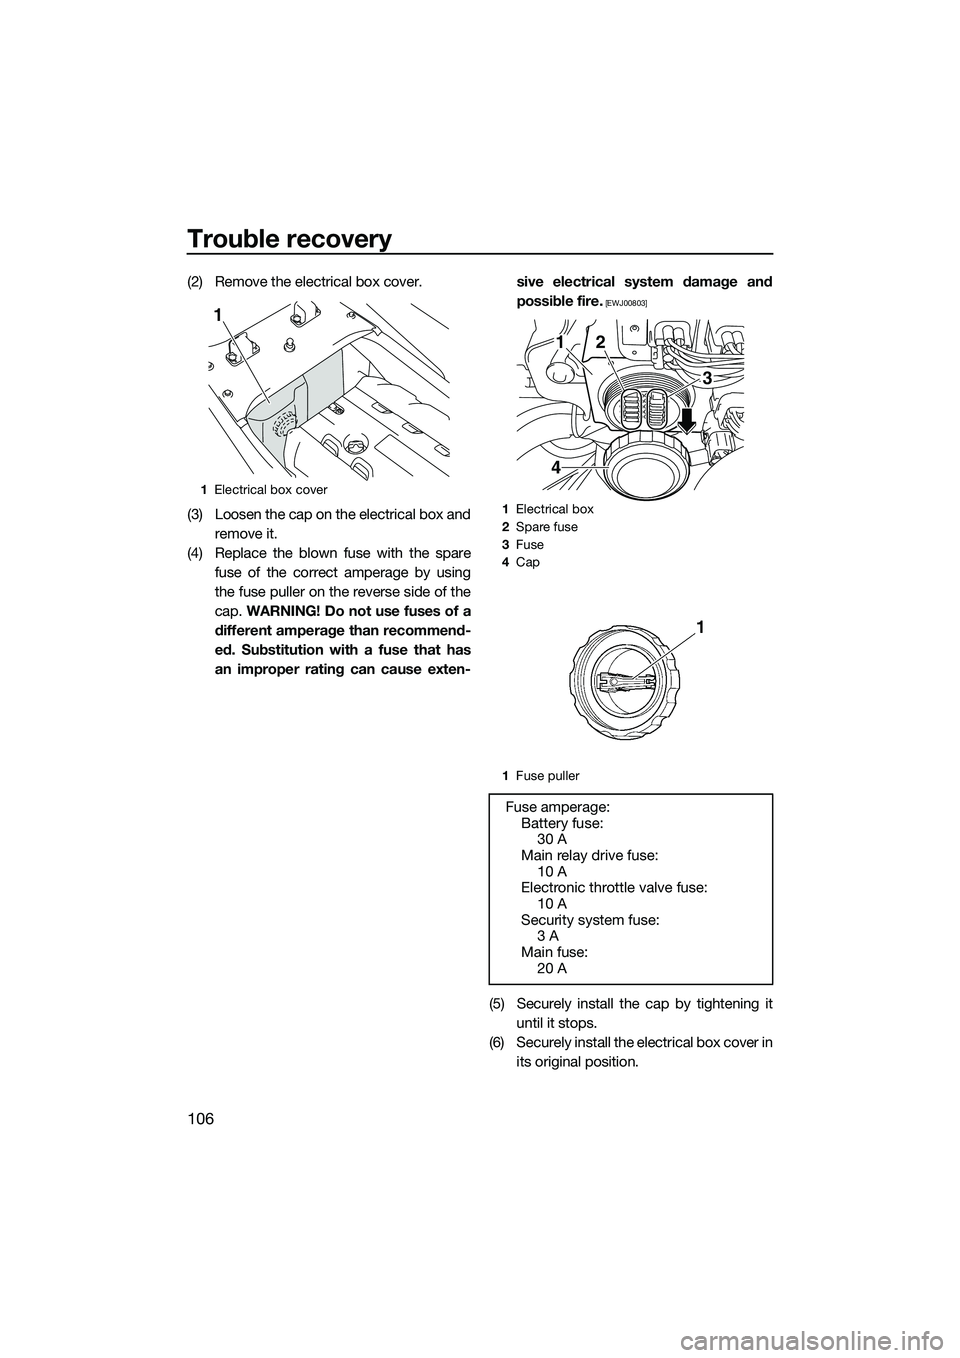 YAMAHA FX SVHO 2014  Owners Manual Trouble recovery
106
(2) Remove the electrical box cover.
(3) Loosen the cap on the electrical box andremove it.
(4) Replace the blown fuse with the spare fuse of the correct amperage by using
the fus